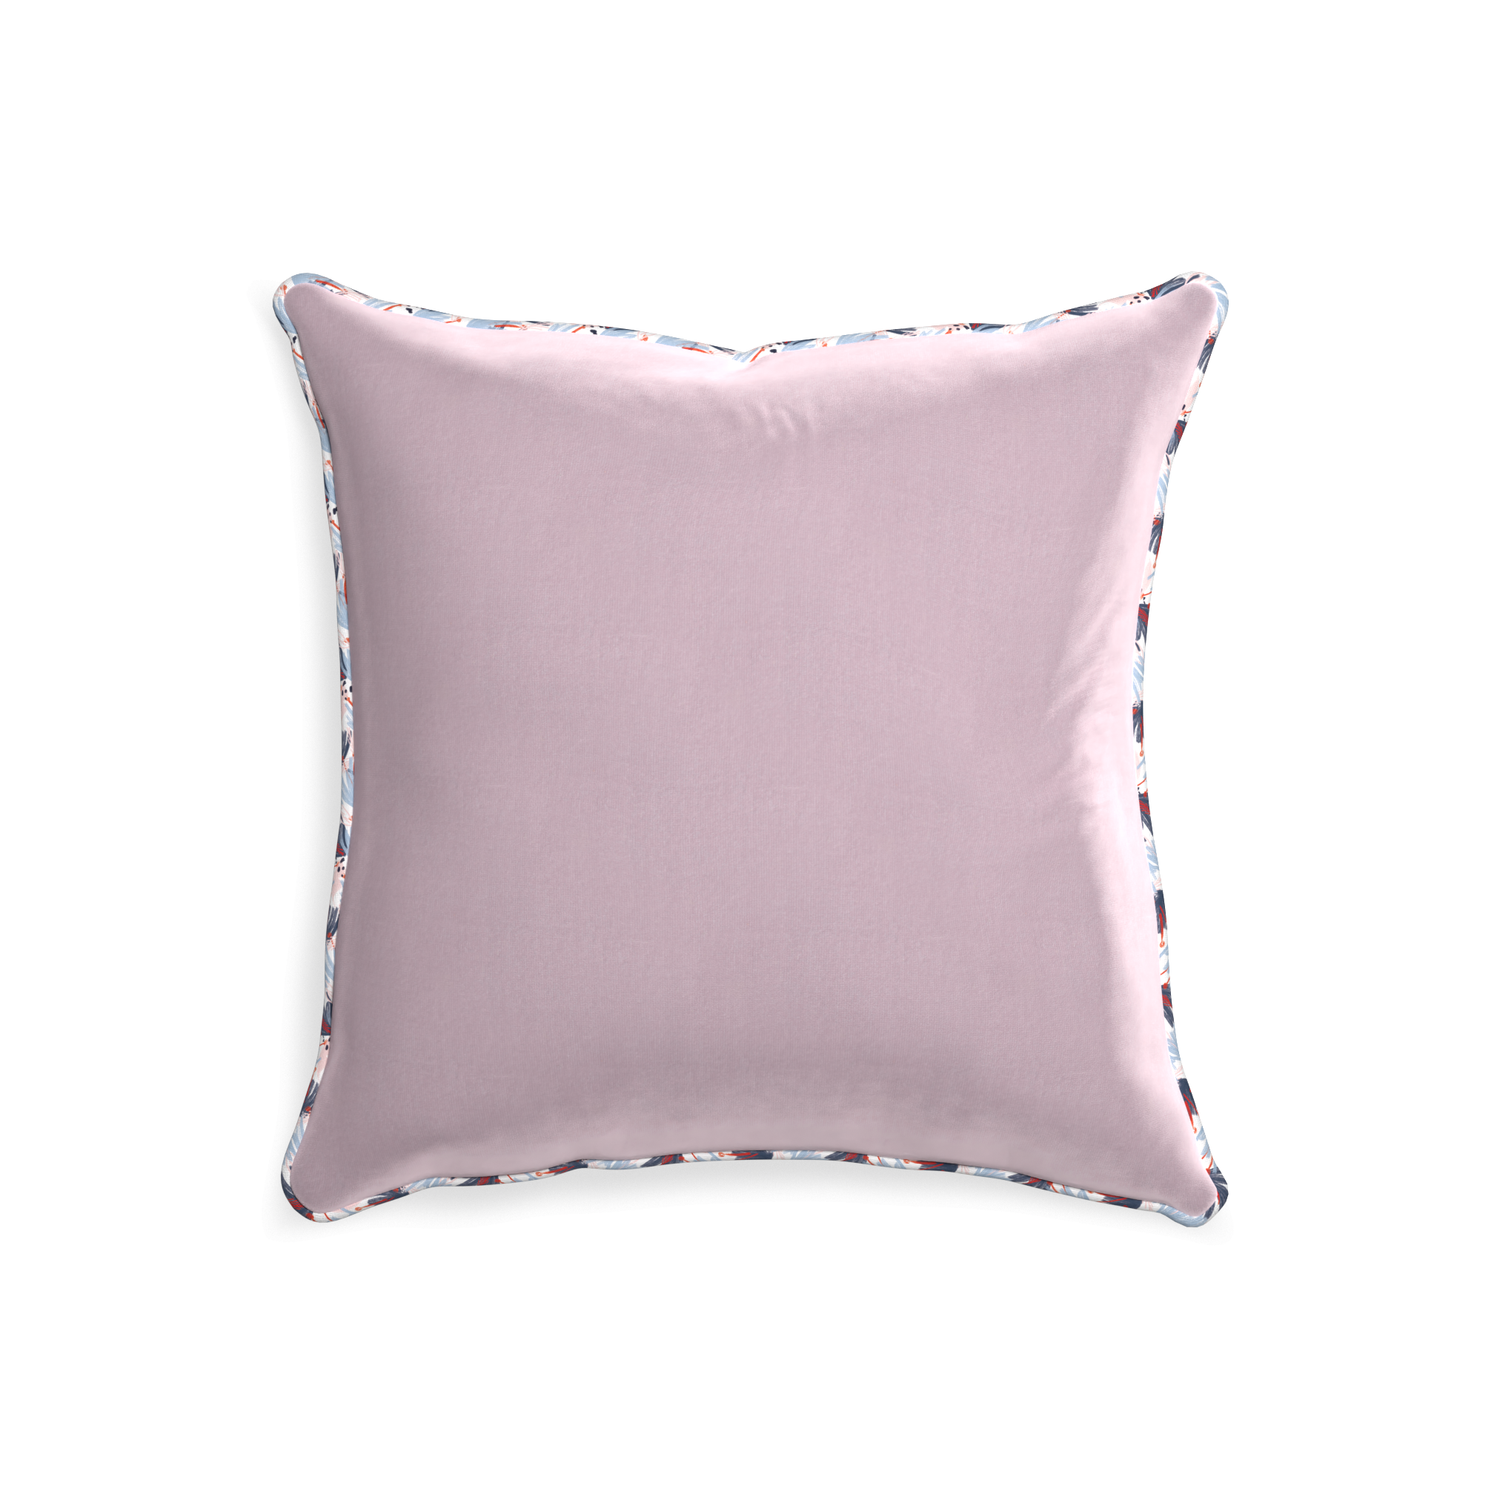 20-square lilac velvet custom lilacpillow with e piping on white background